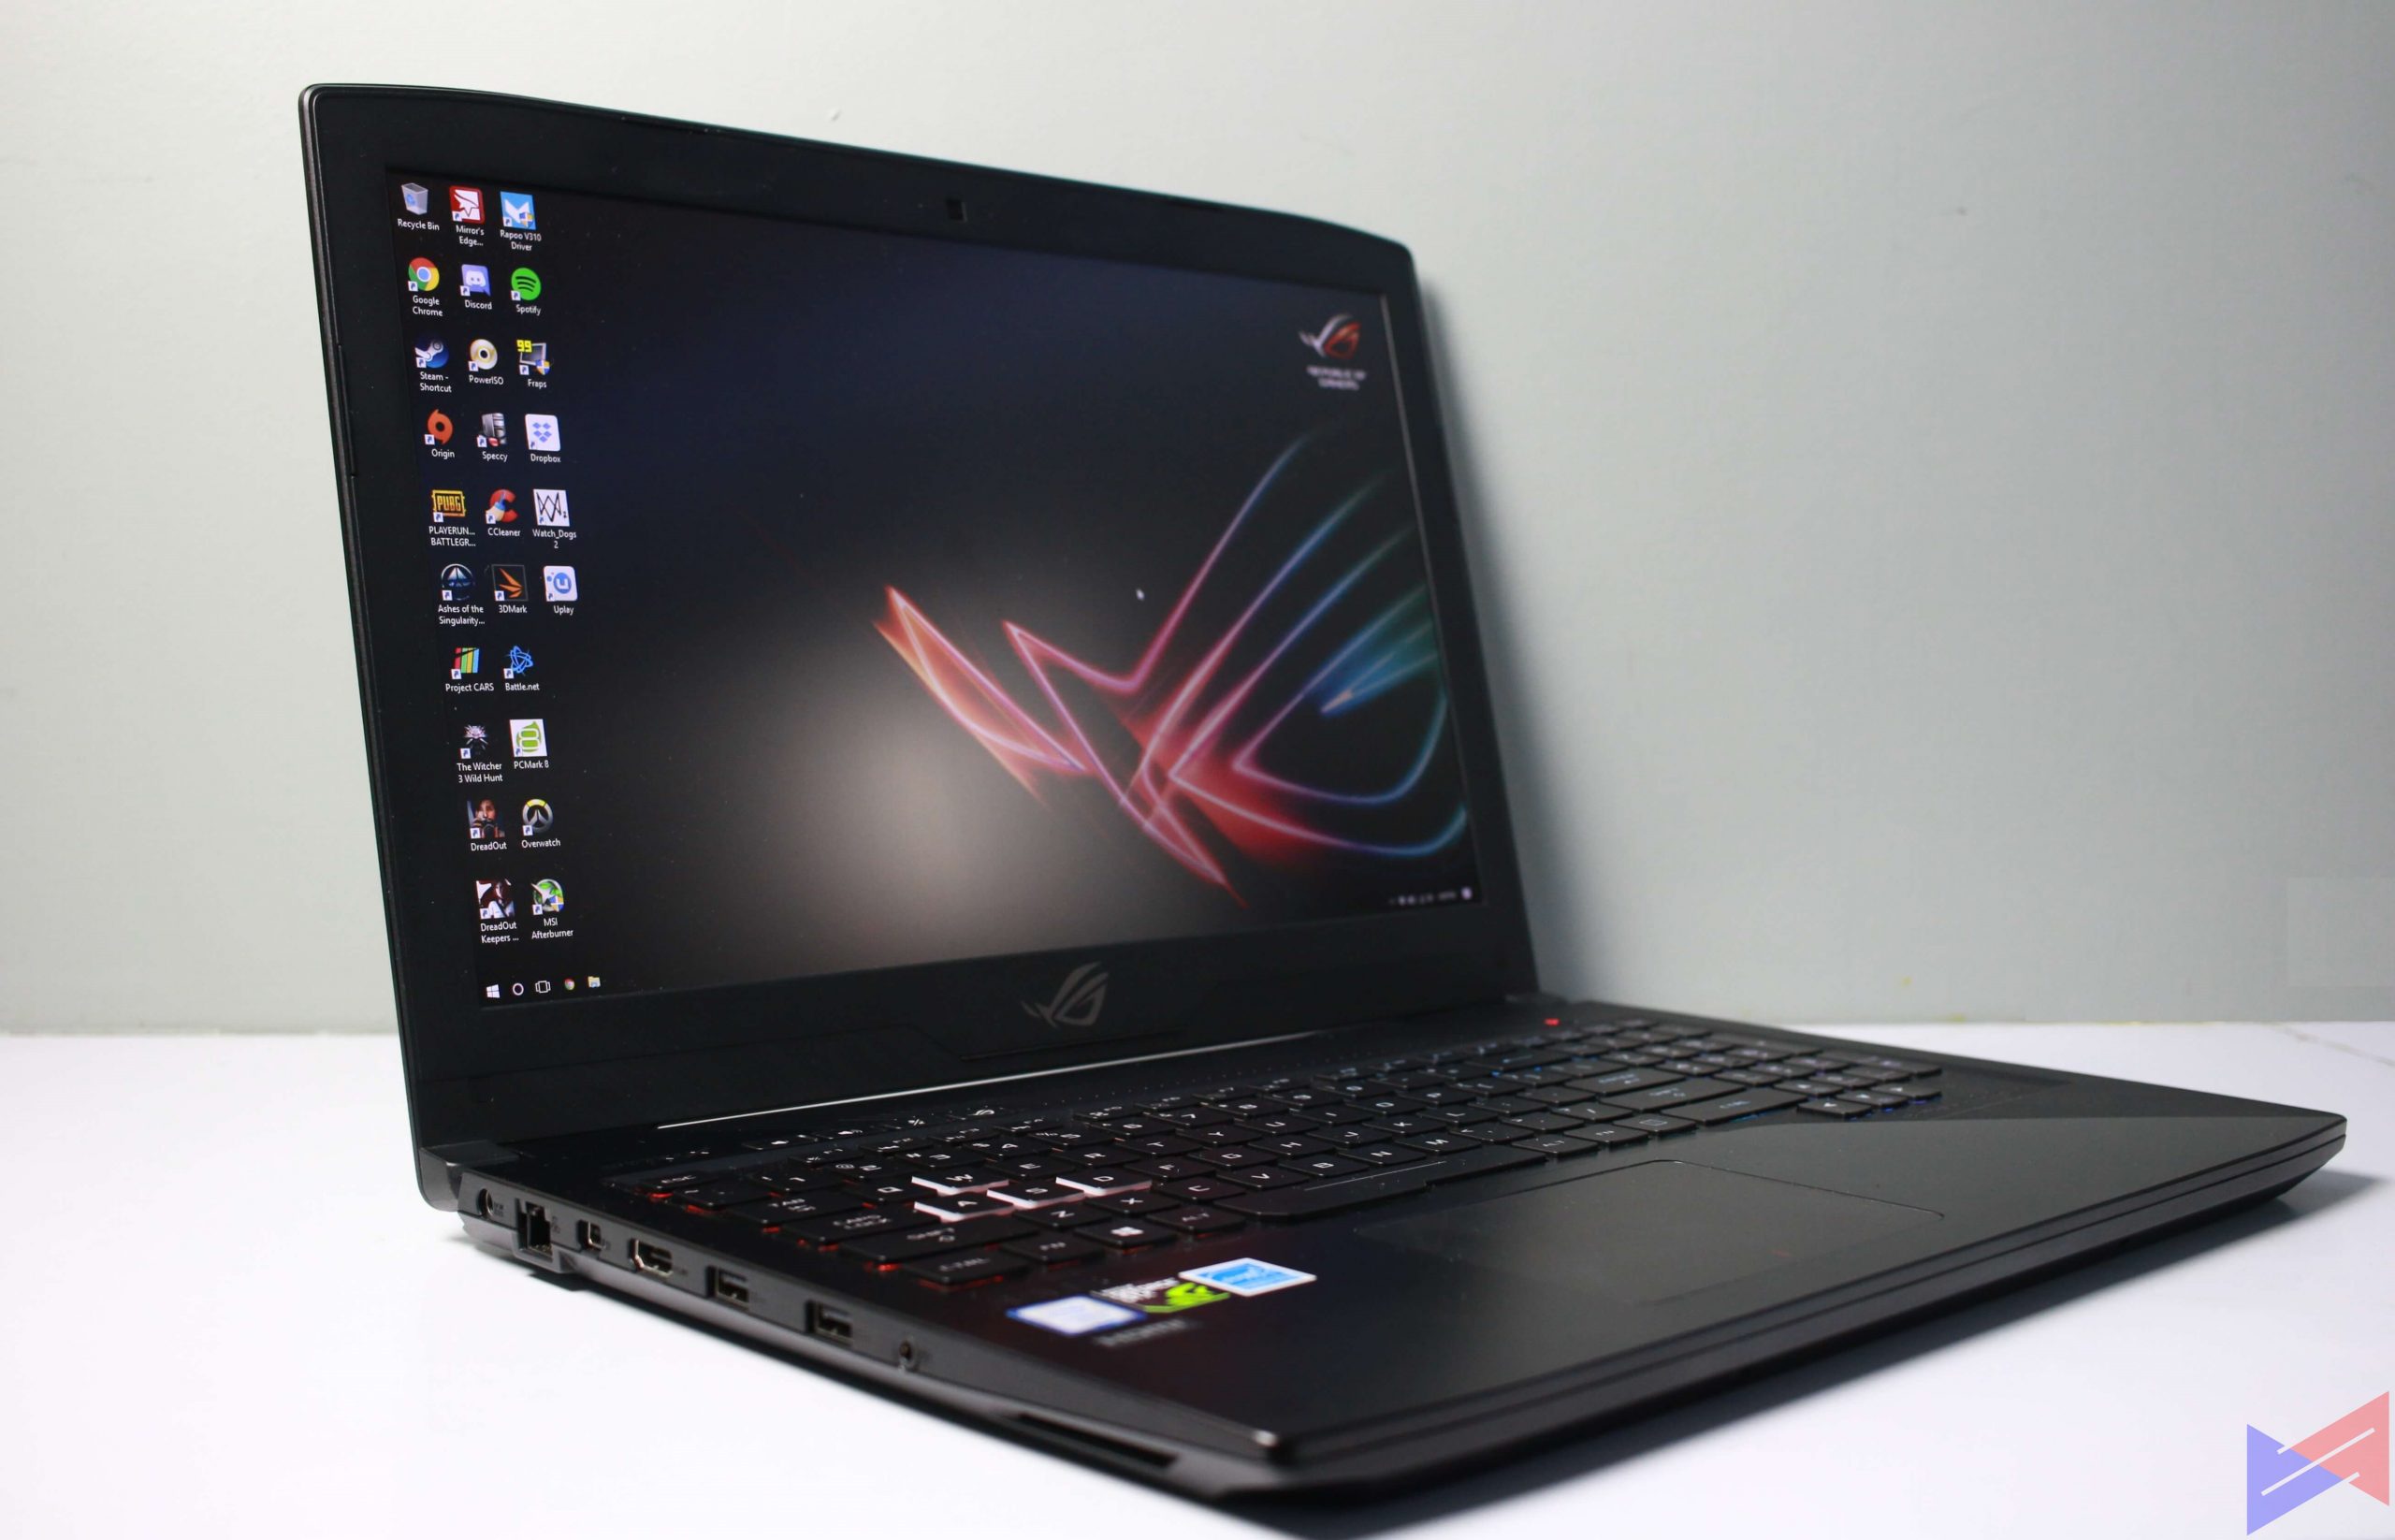 ASUS ROG Strix GL503VD Review: An Ideal Introduction to Gaming Laptops